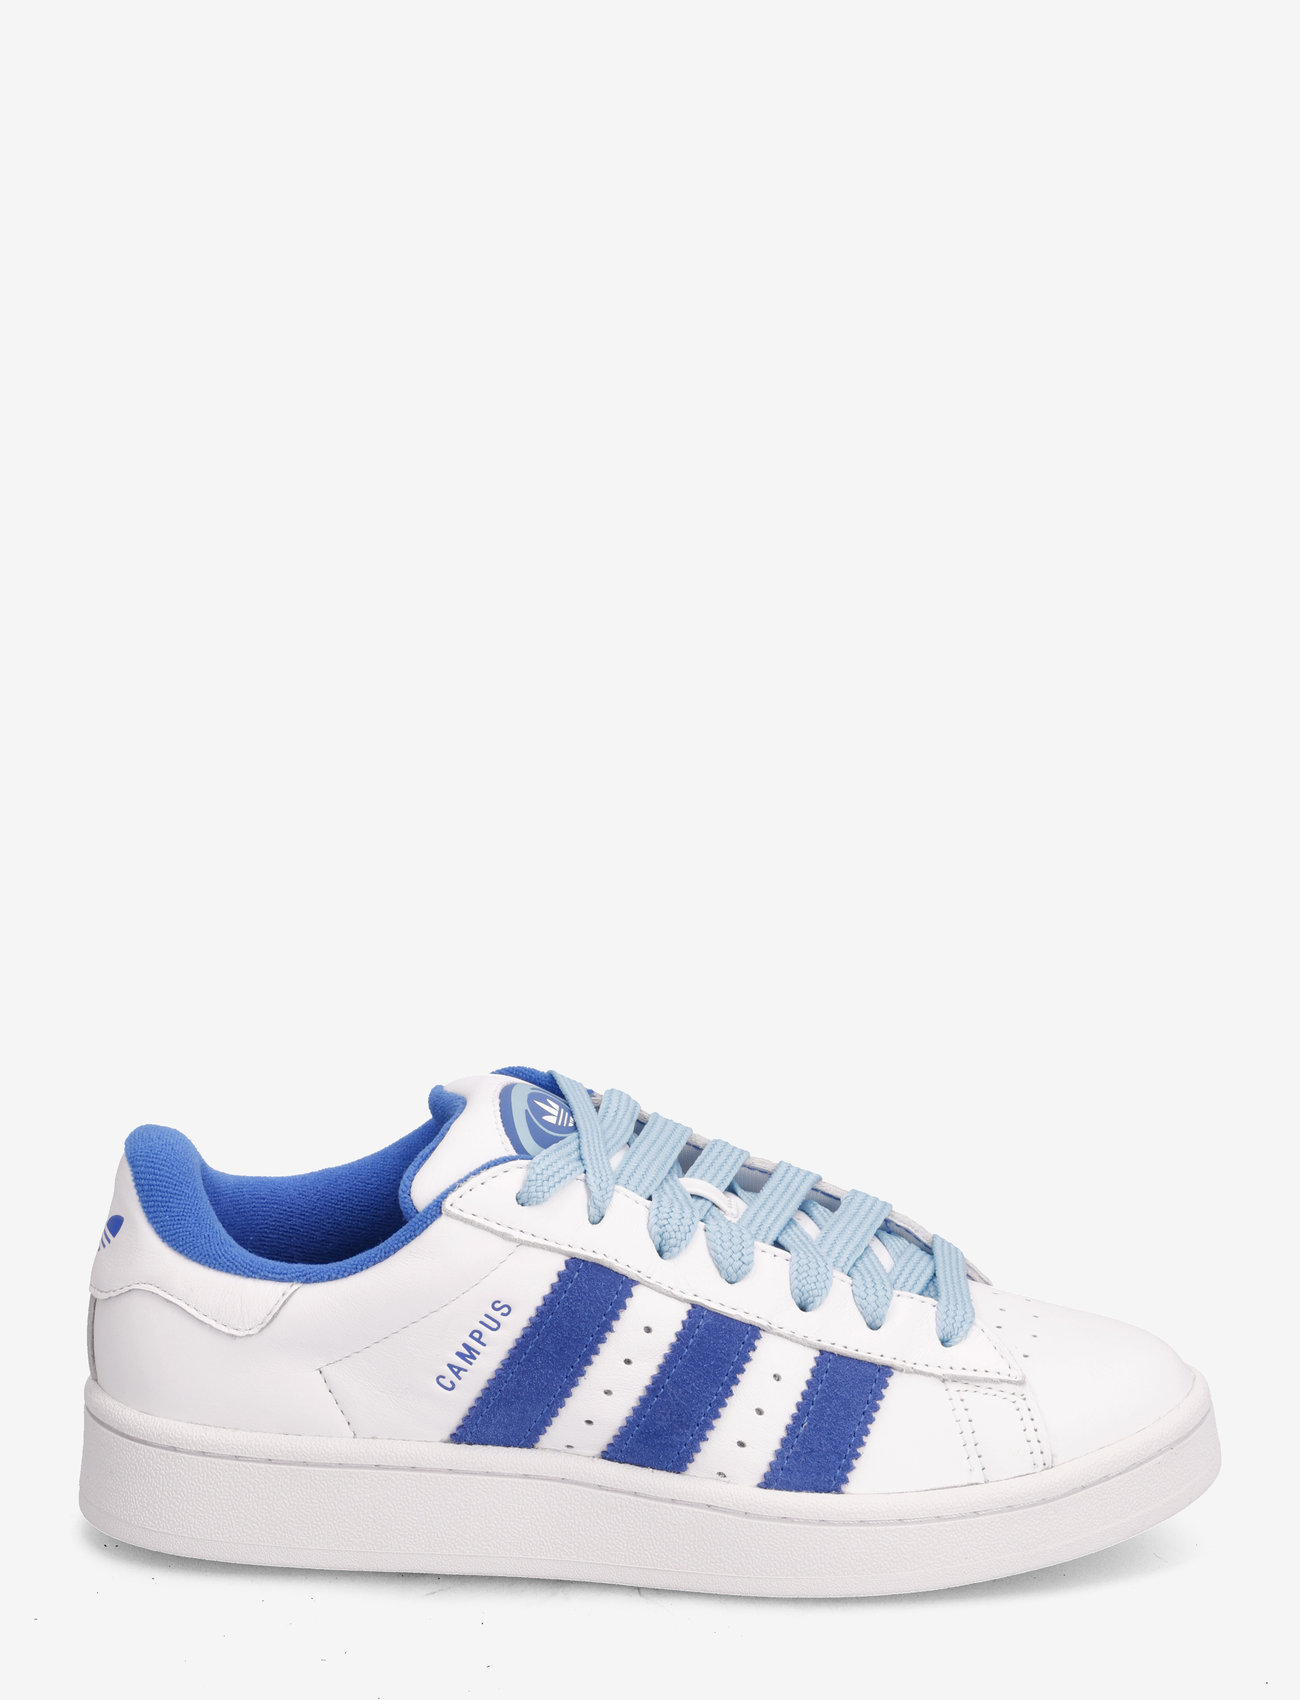 adidas Originals - CAMPUS 00s - low top sneakers - ftwwht/blue/brblue - 1